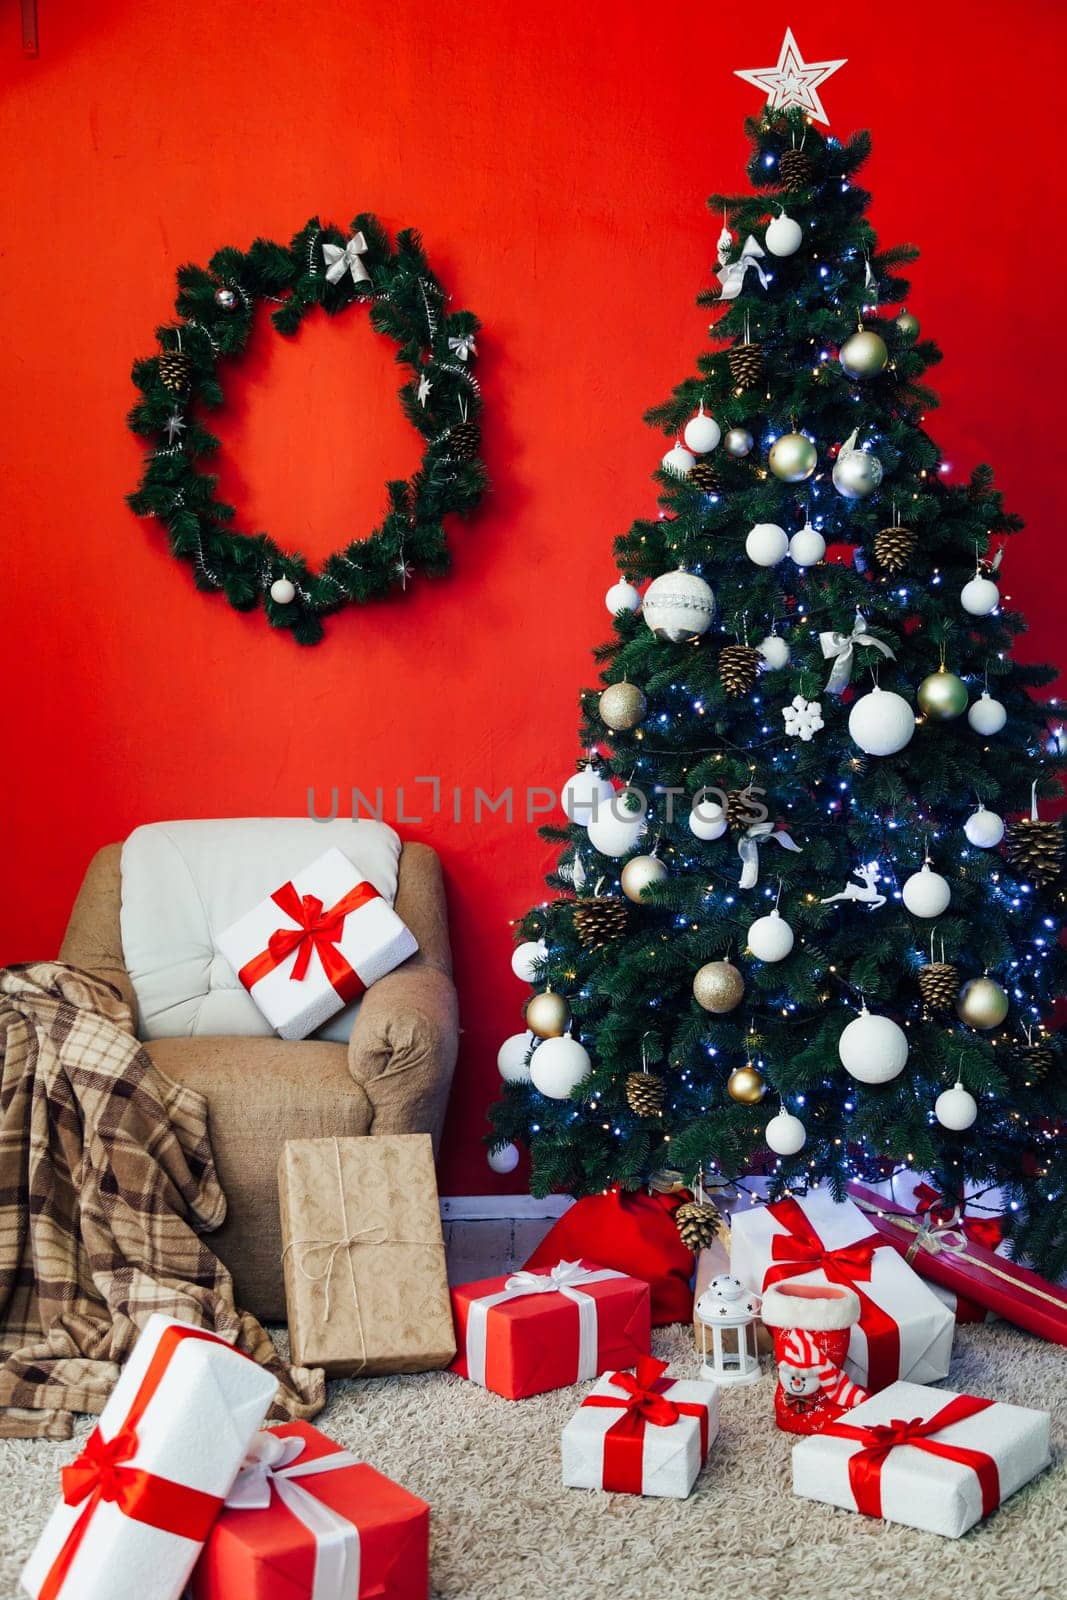 Christmas tree with gifts in the interior of the red room decor for the new year